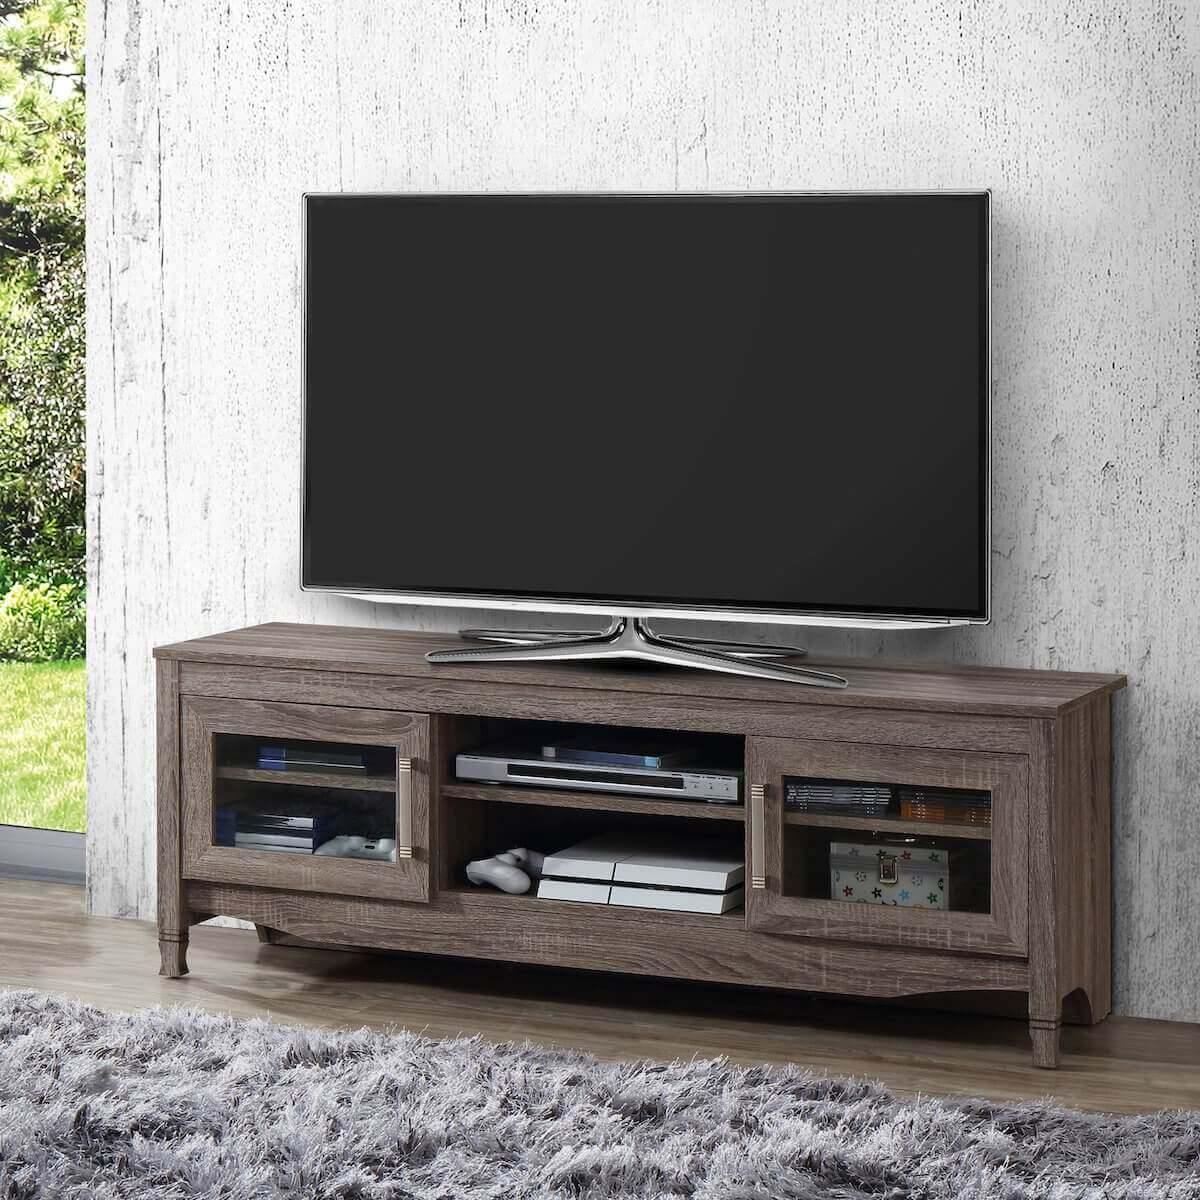 Techni Mobili Gray Driftwood TV Stand RTA-8855-GRY in Room